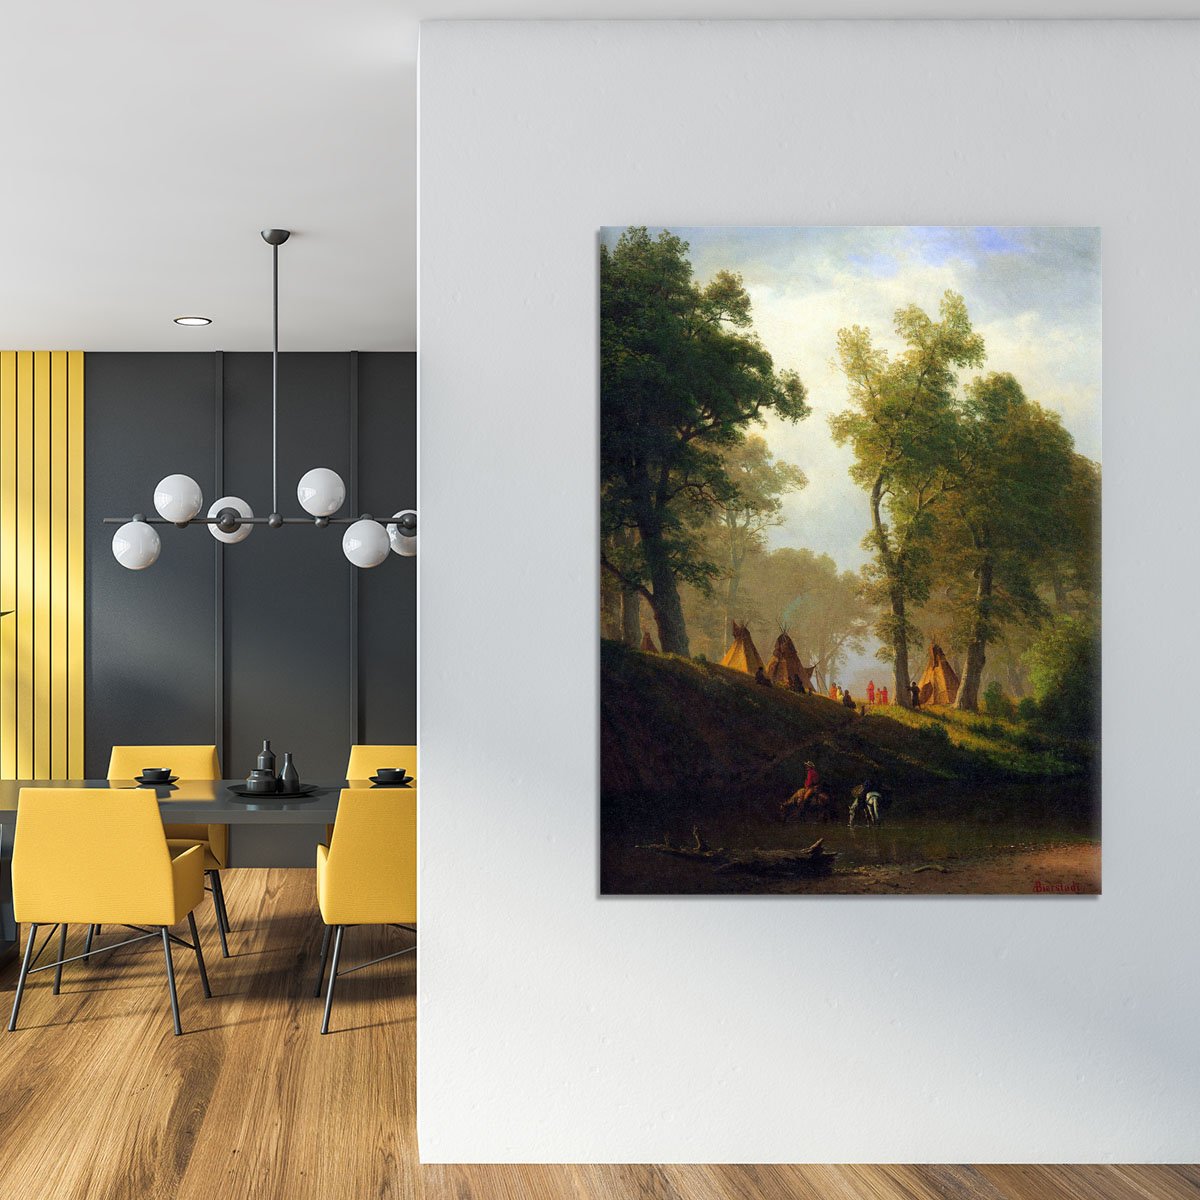 Wolf River Kansas by Bierstadt Canvas Print or Poster